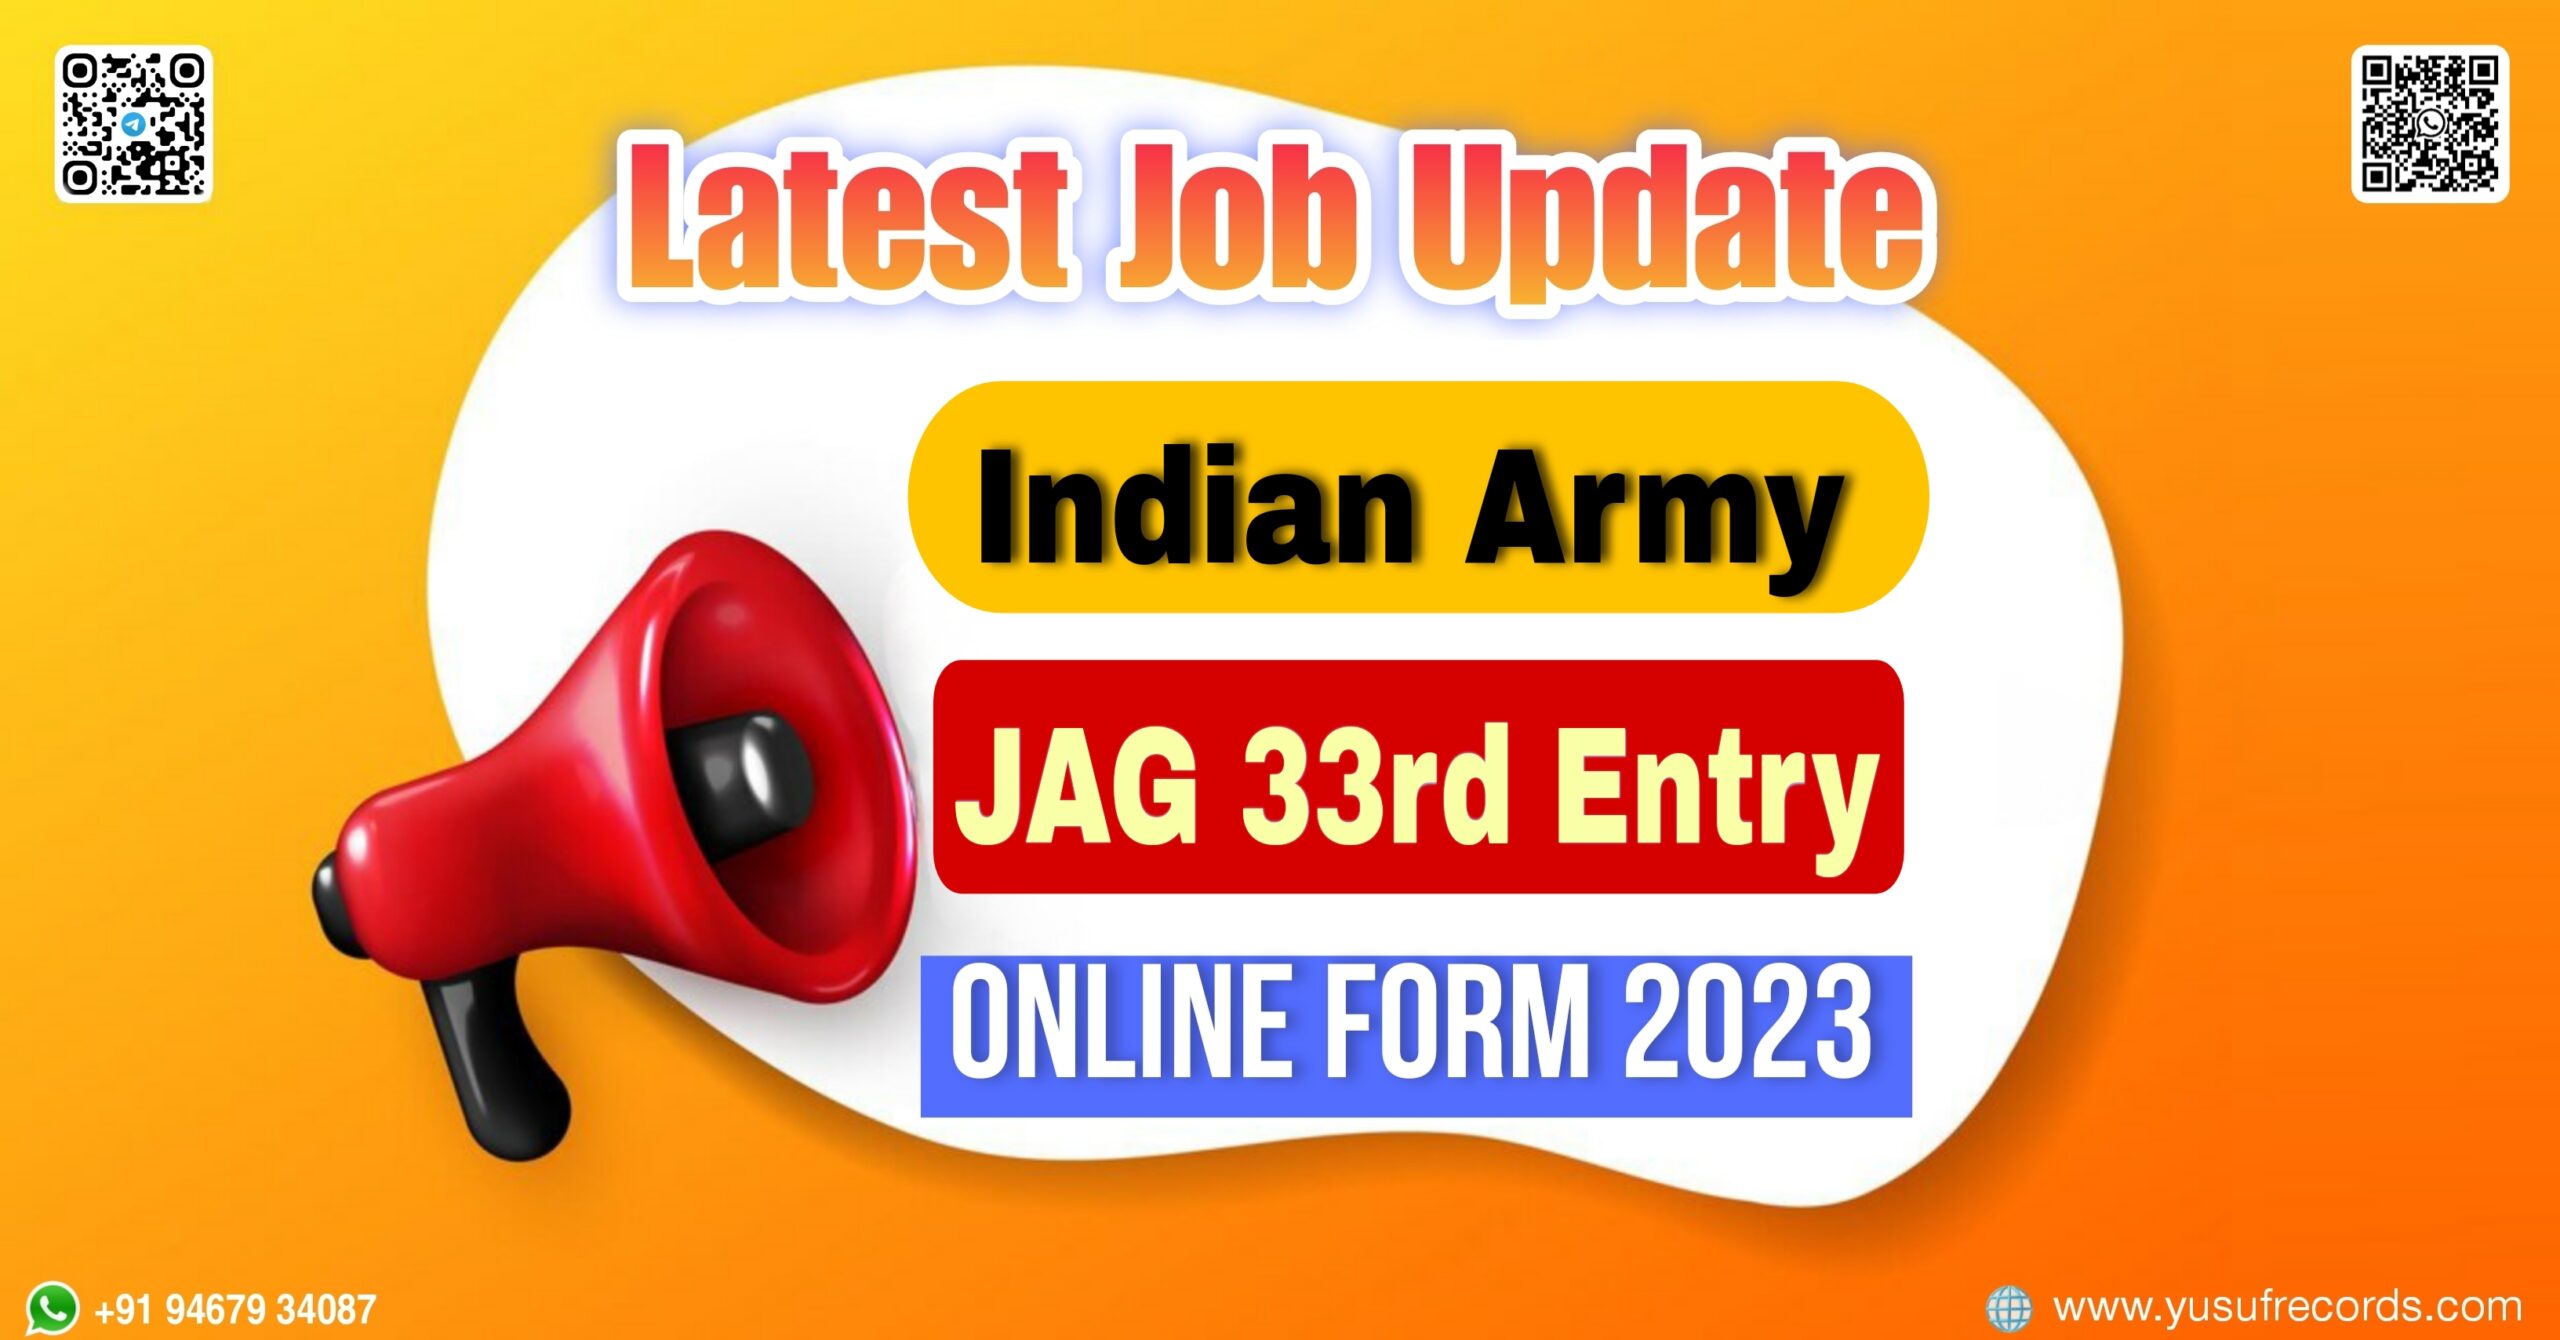 Indian Army JAG 33rd Entry Online Form